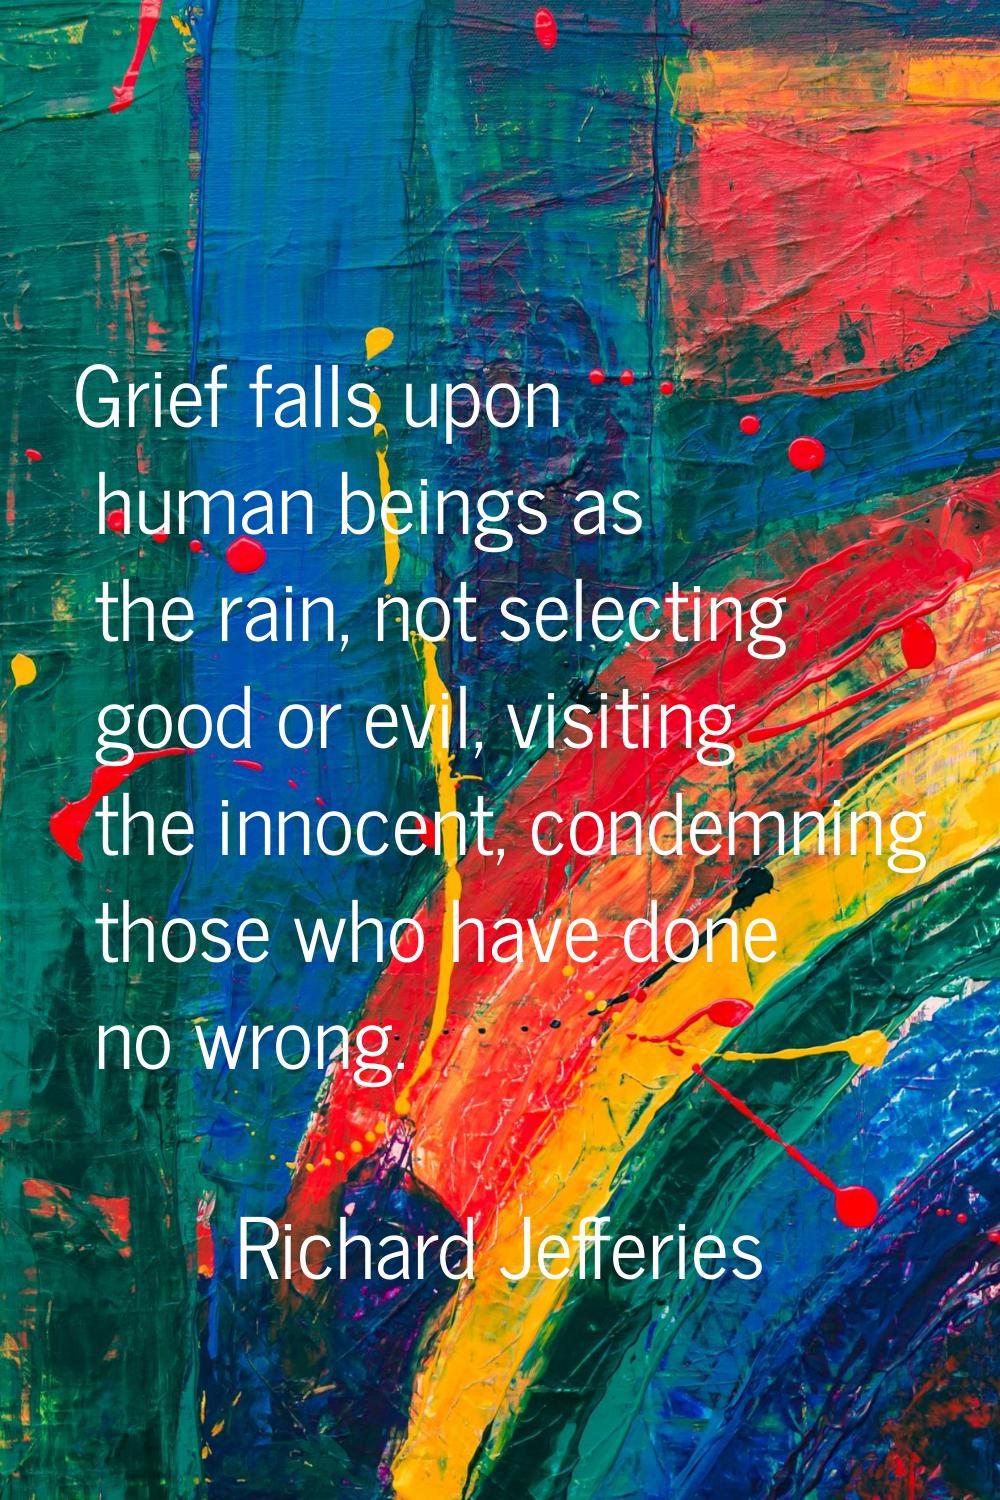 Grief falls upon human beings as the rain, not selecting good or evil, visiting the innocent, conde